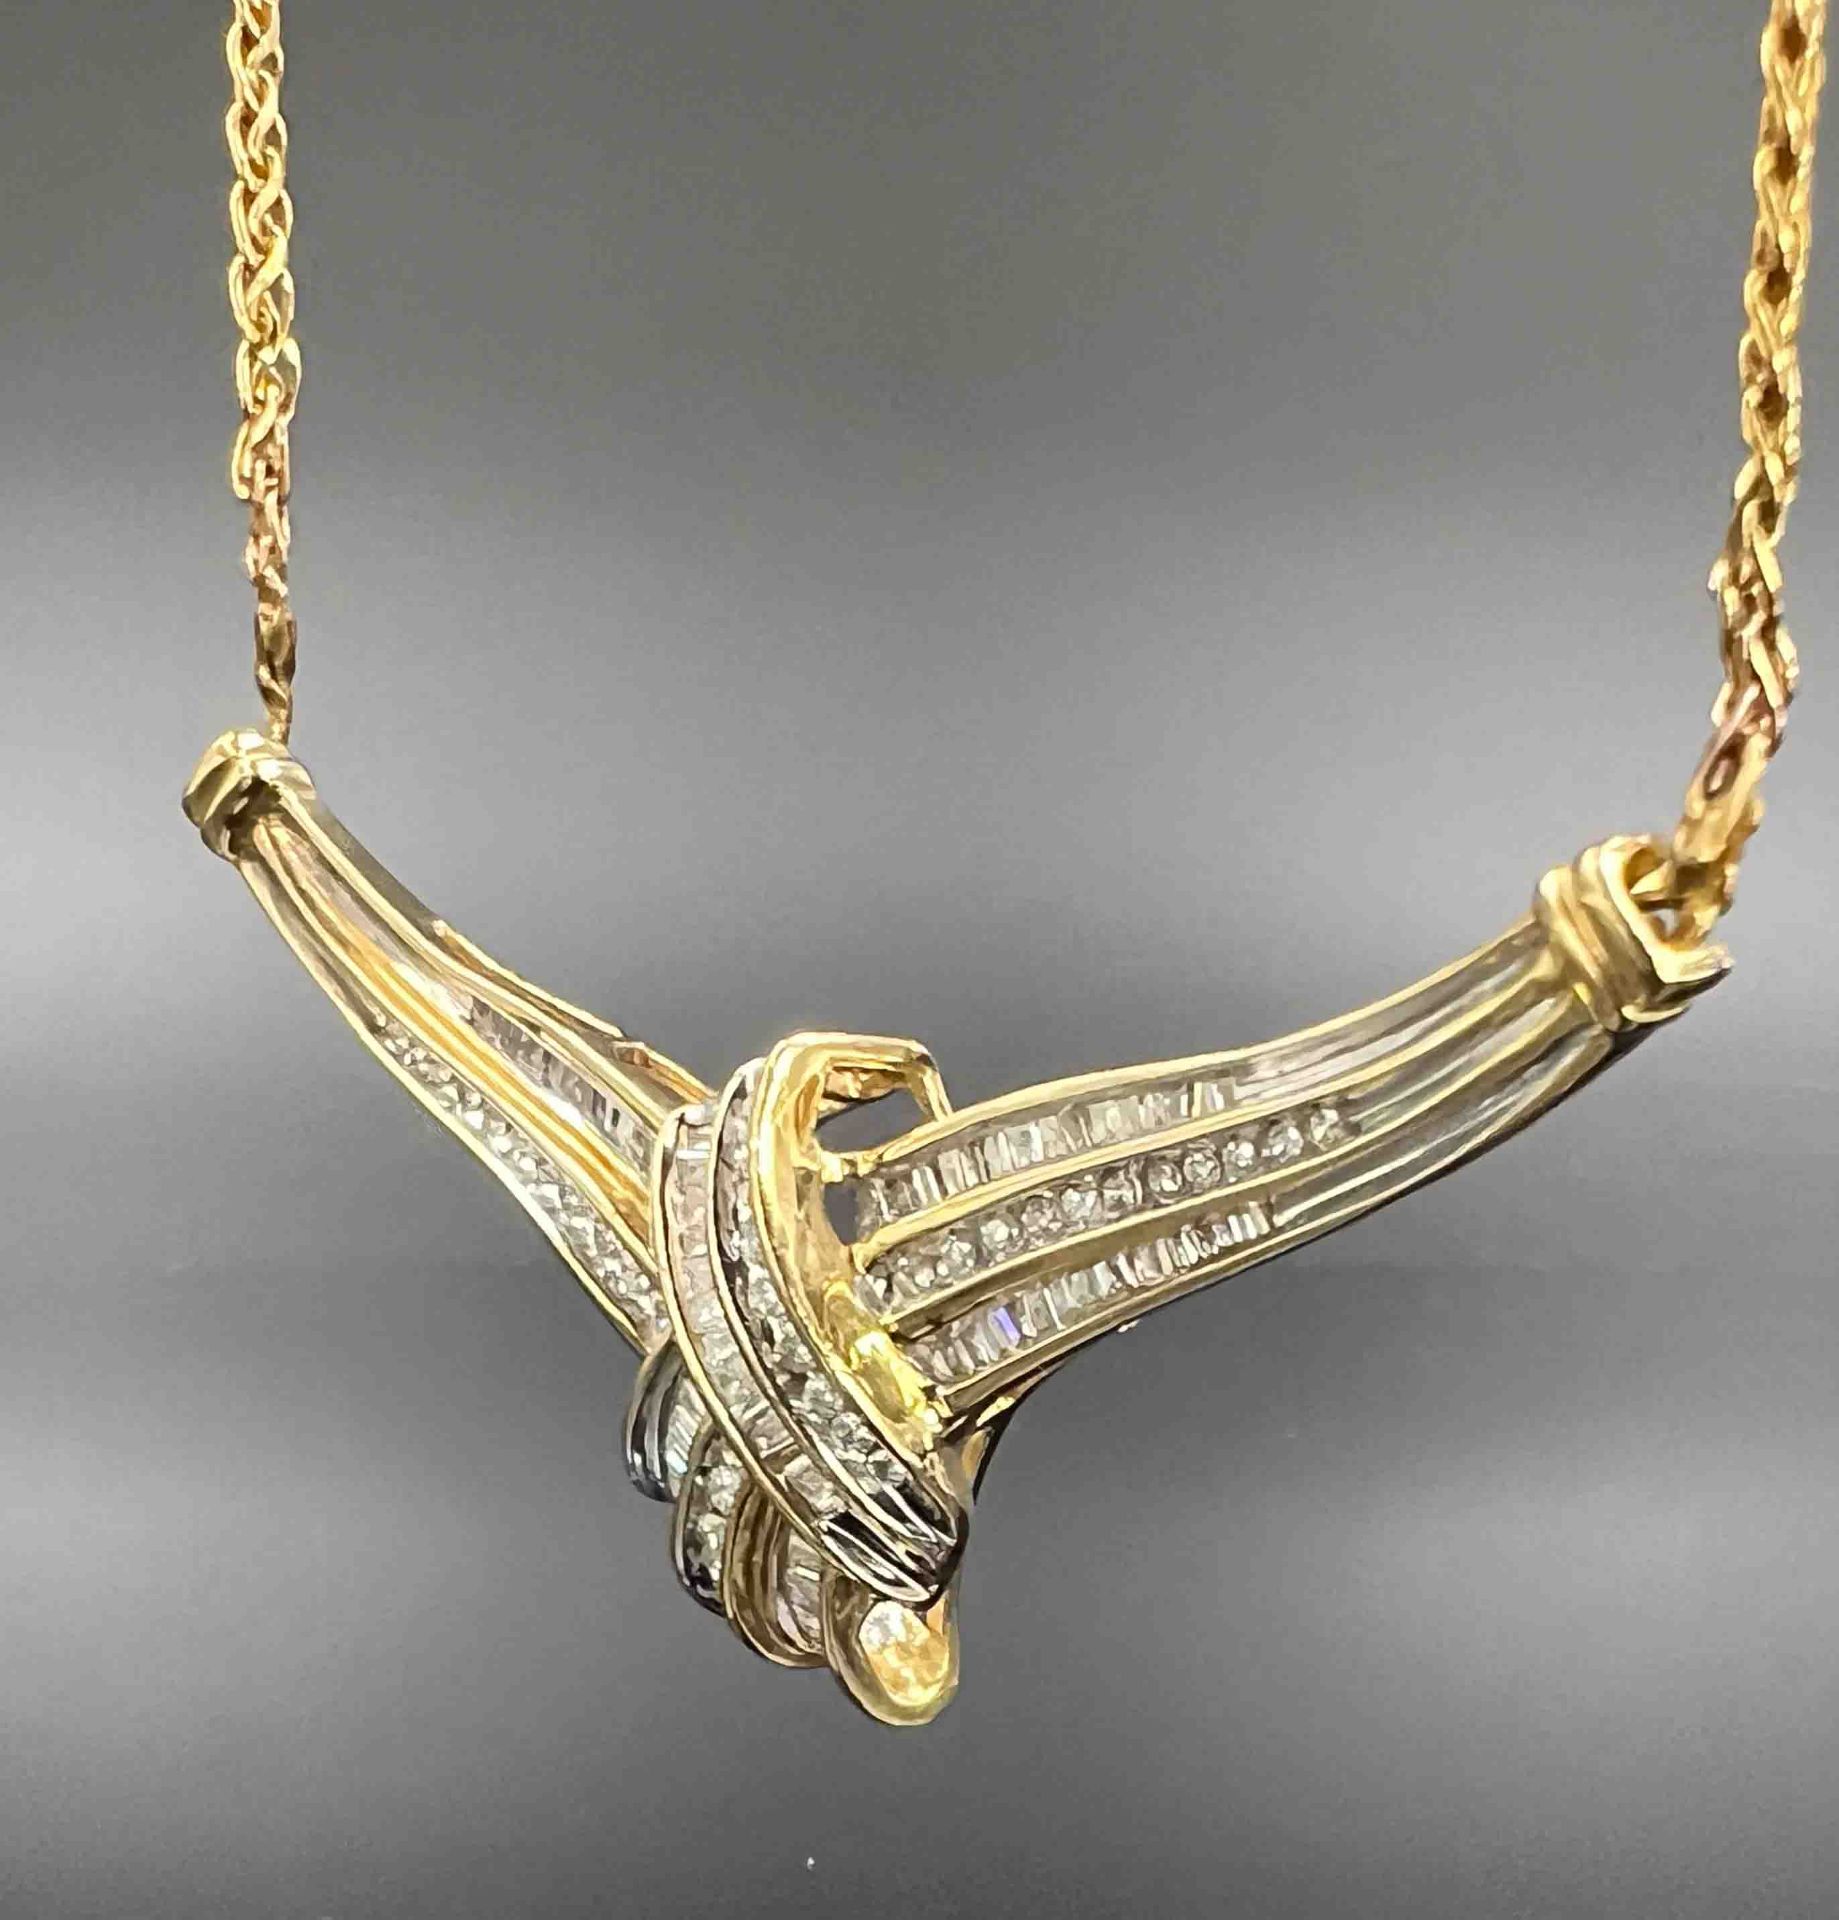 Necklace. 585 yellow gold and white gold with diamonds. - Image 2 of 10